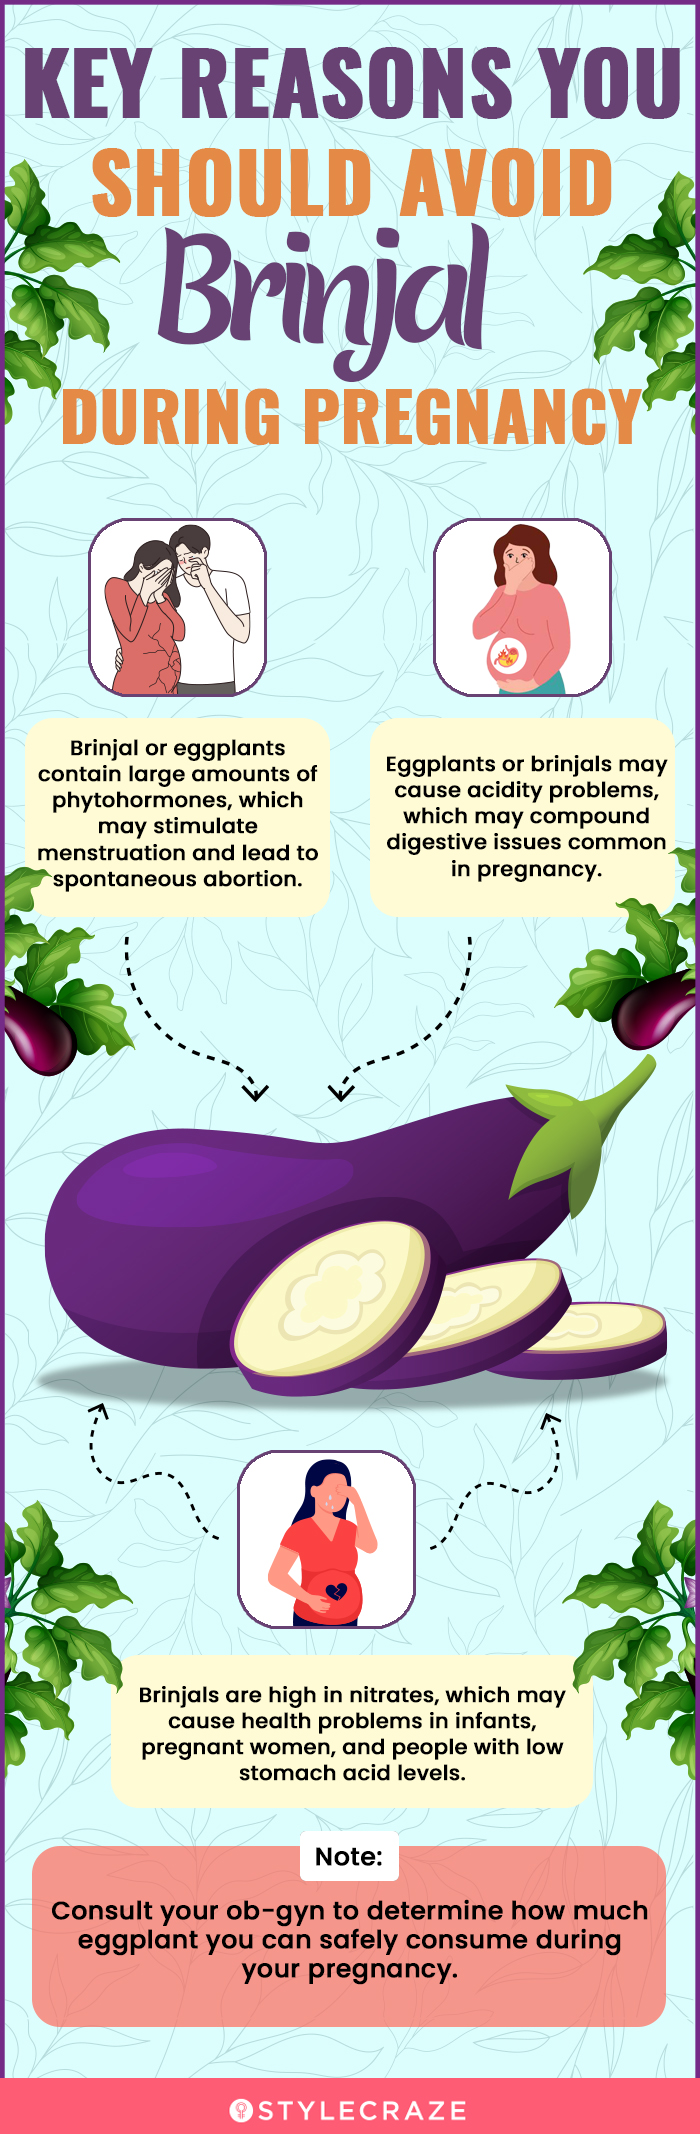 3 Main Reasons To Avoid Brinjal (Eggplant) During Pregnancy  